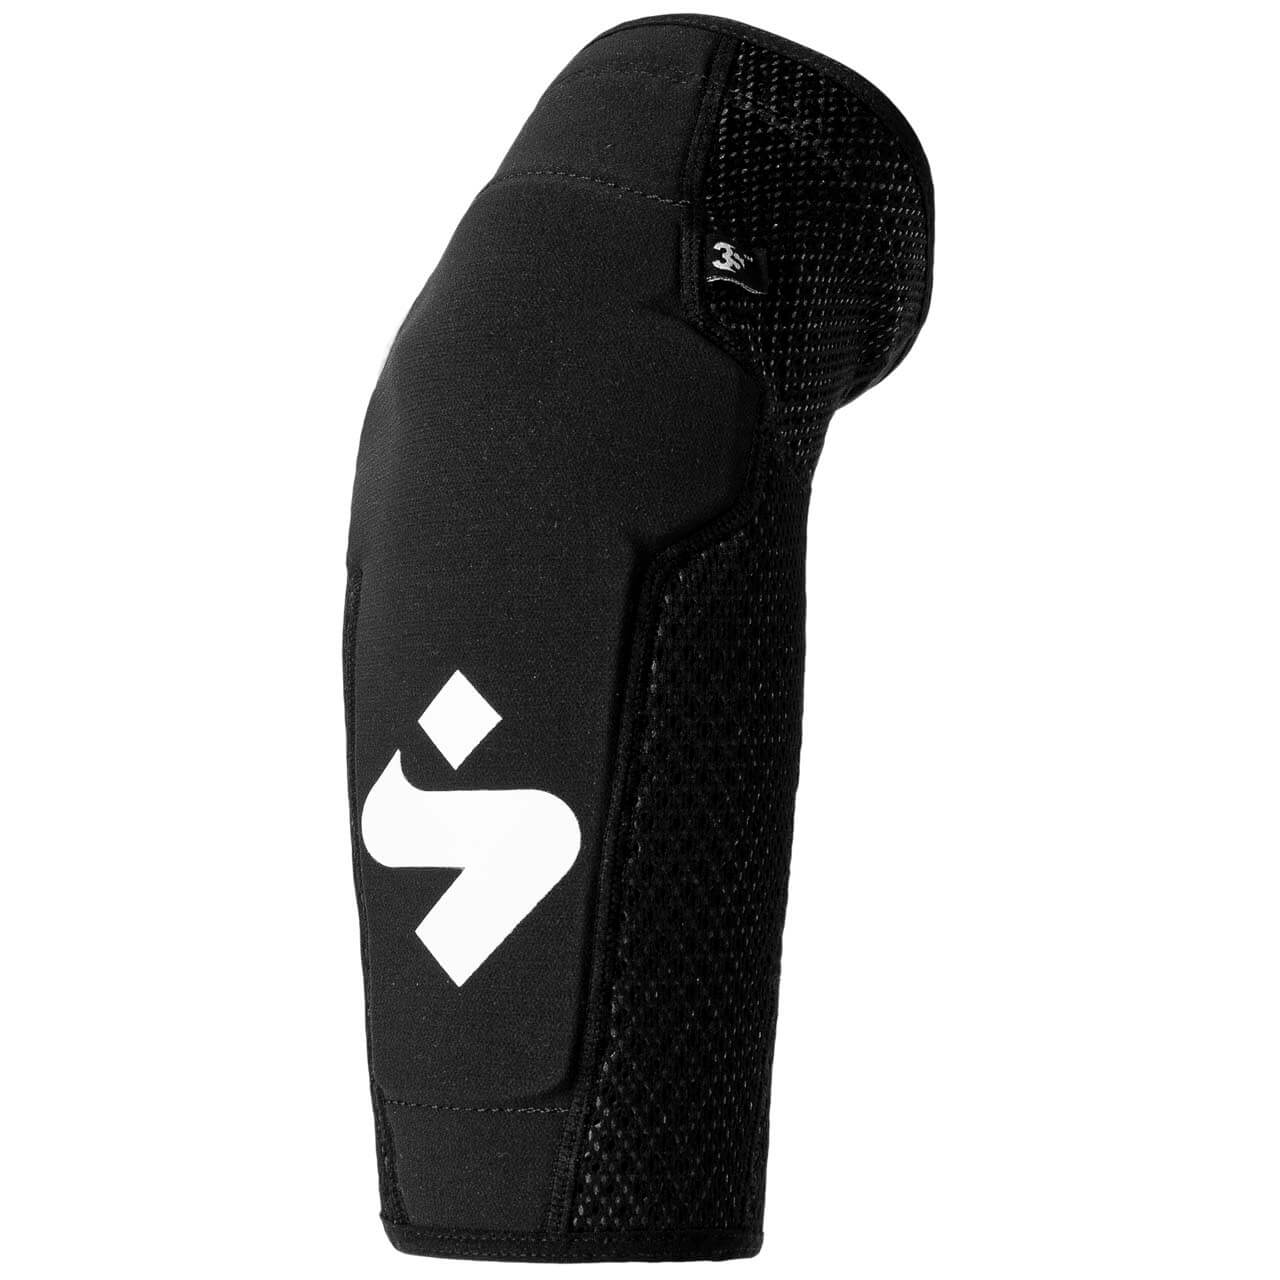 Sweet Protection Knee Guards Light - Black, S